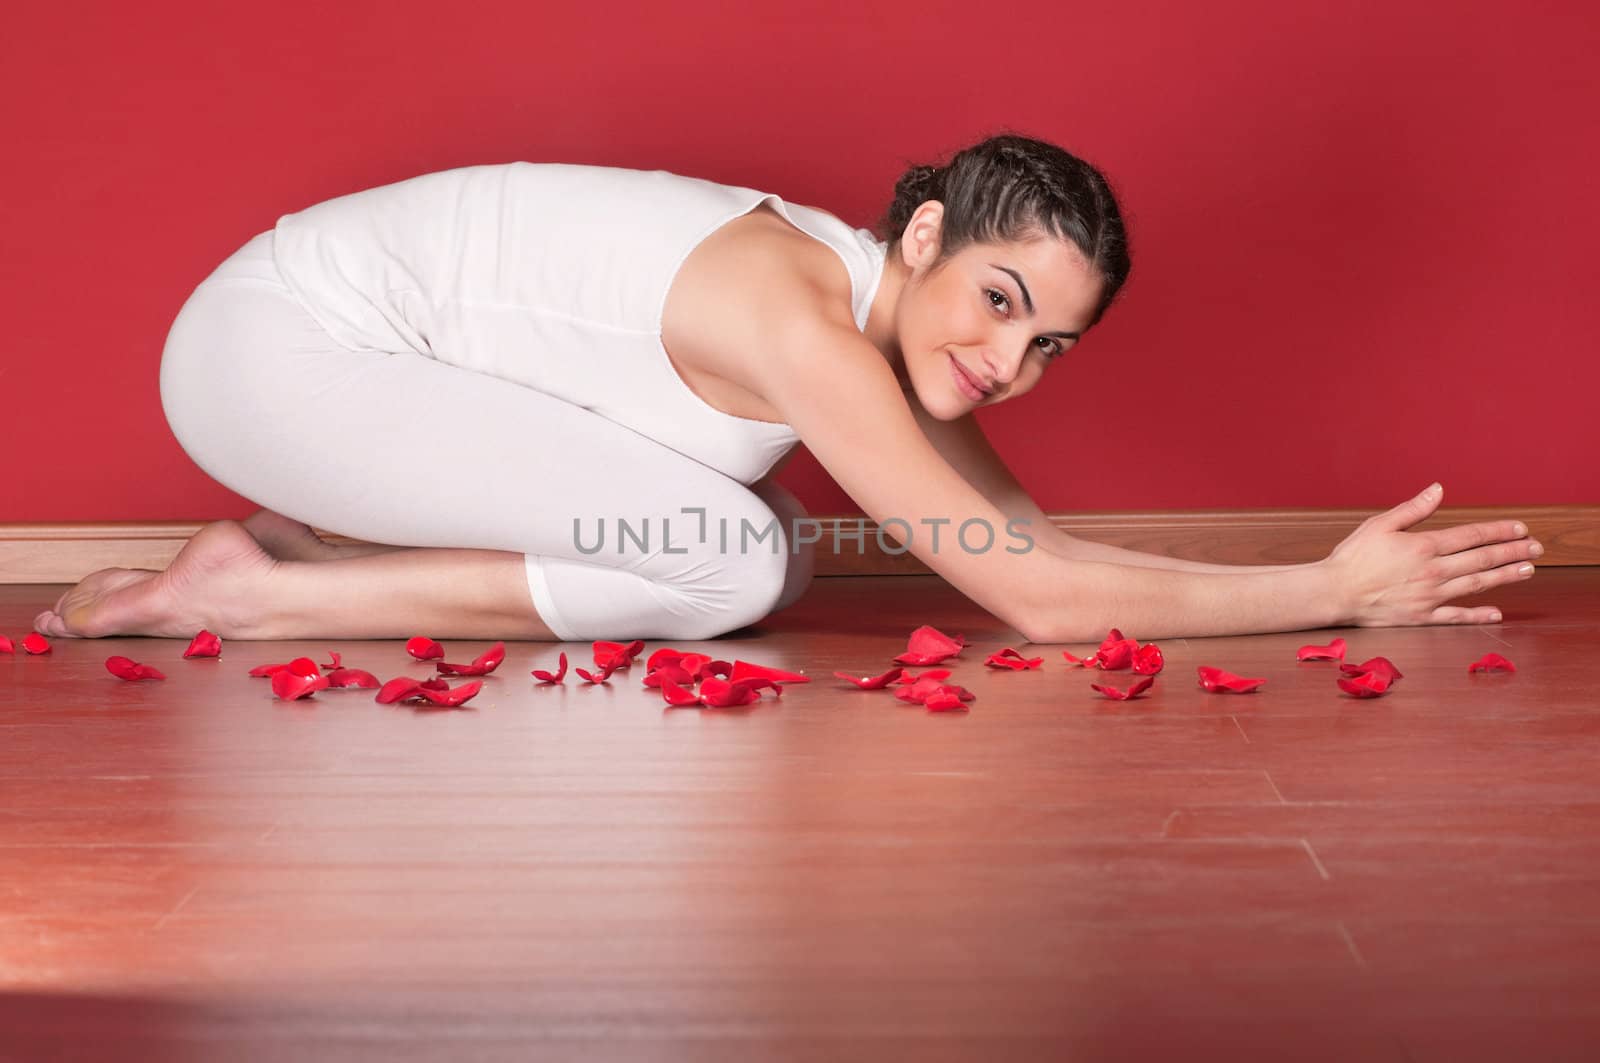 Portrait of a beautiful young woman in a yoga pose with rose petals around